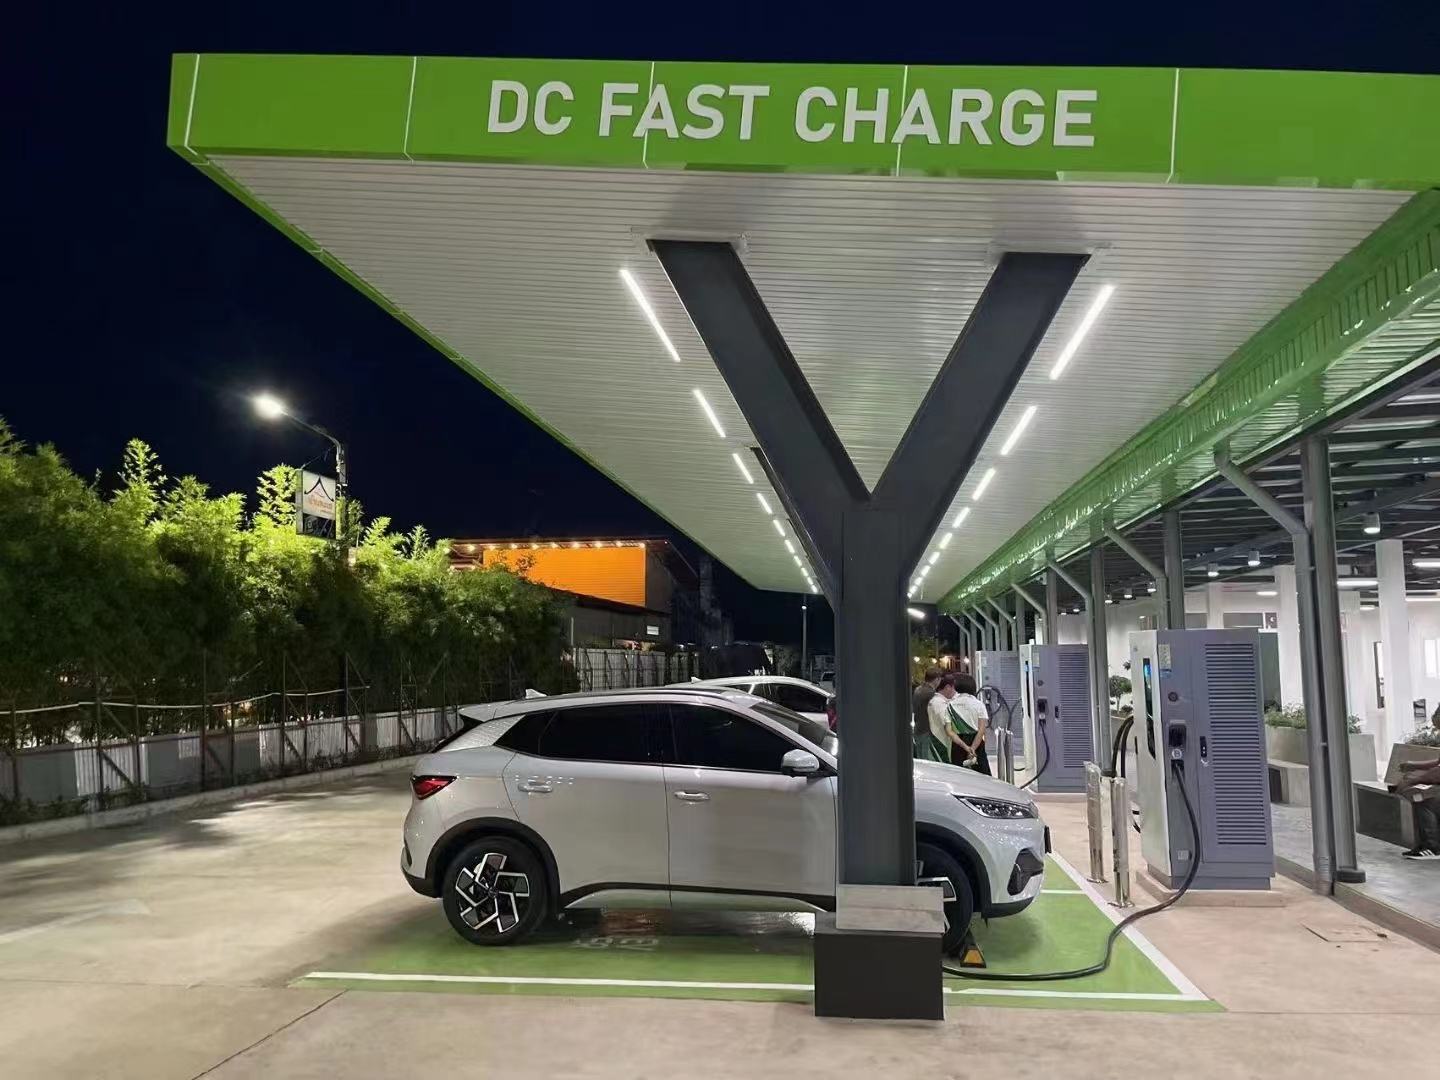 EV charging station at night with cars using DC fast chargers under a green canopy.